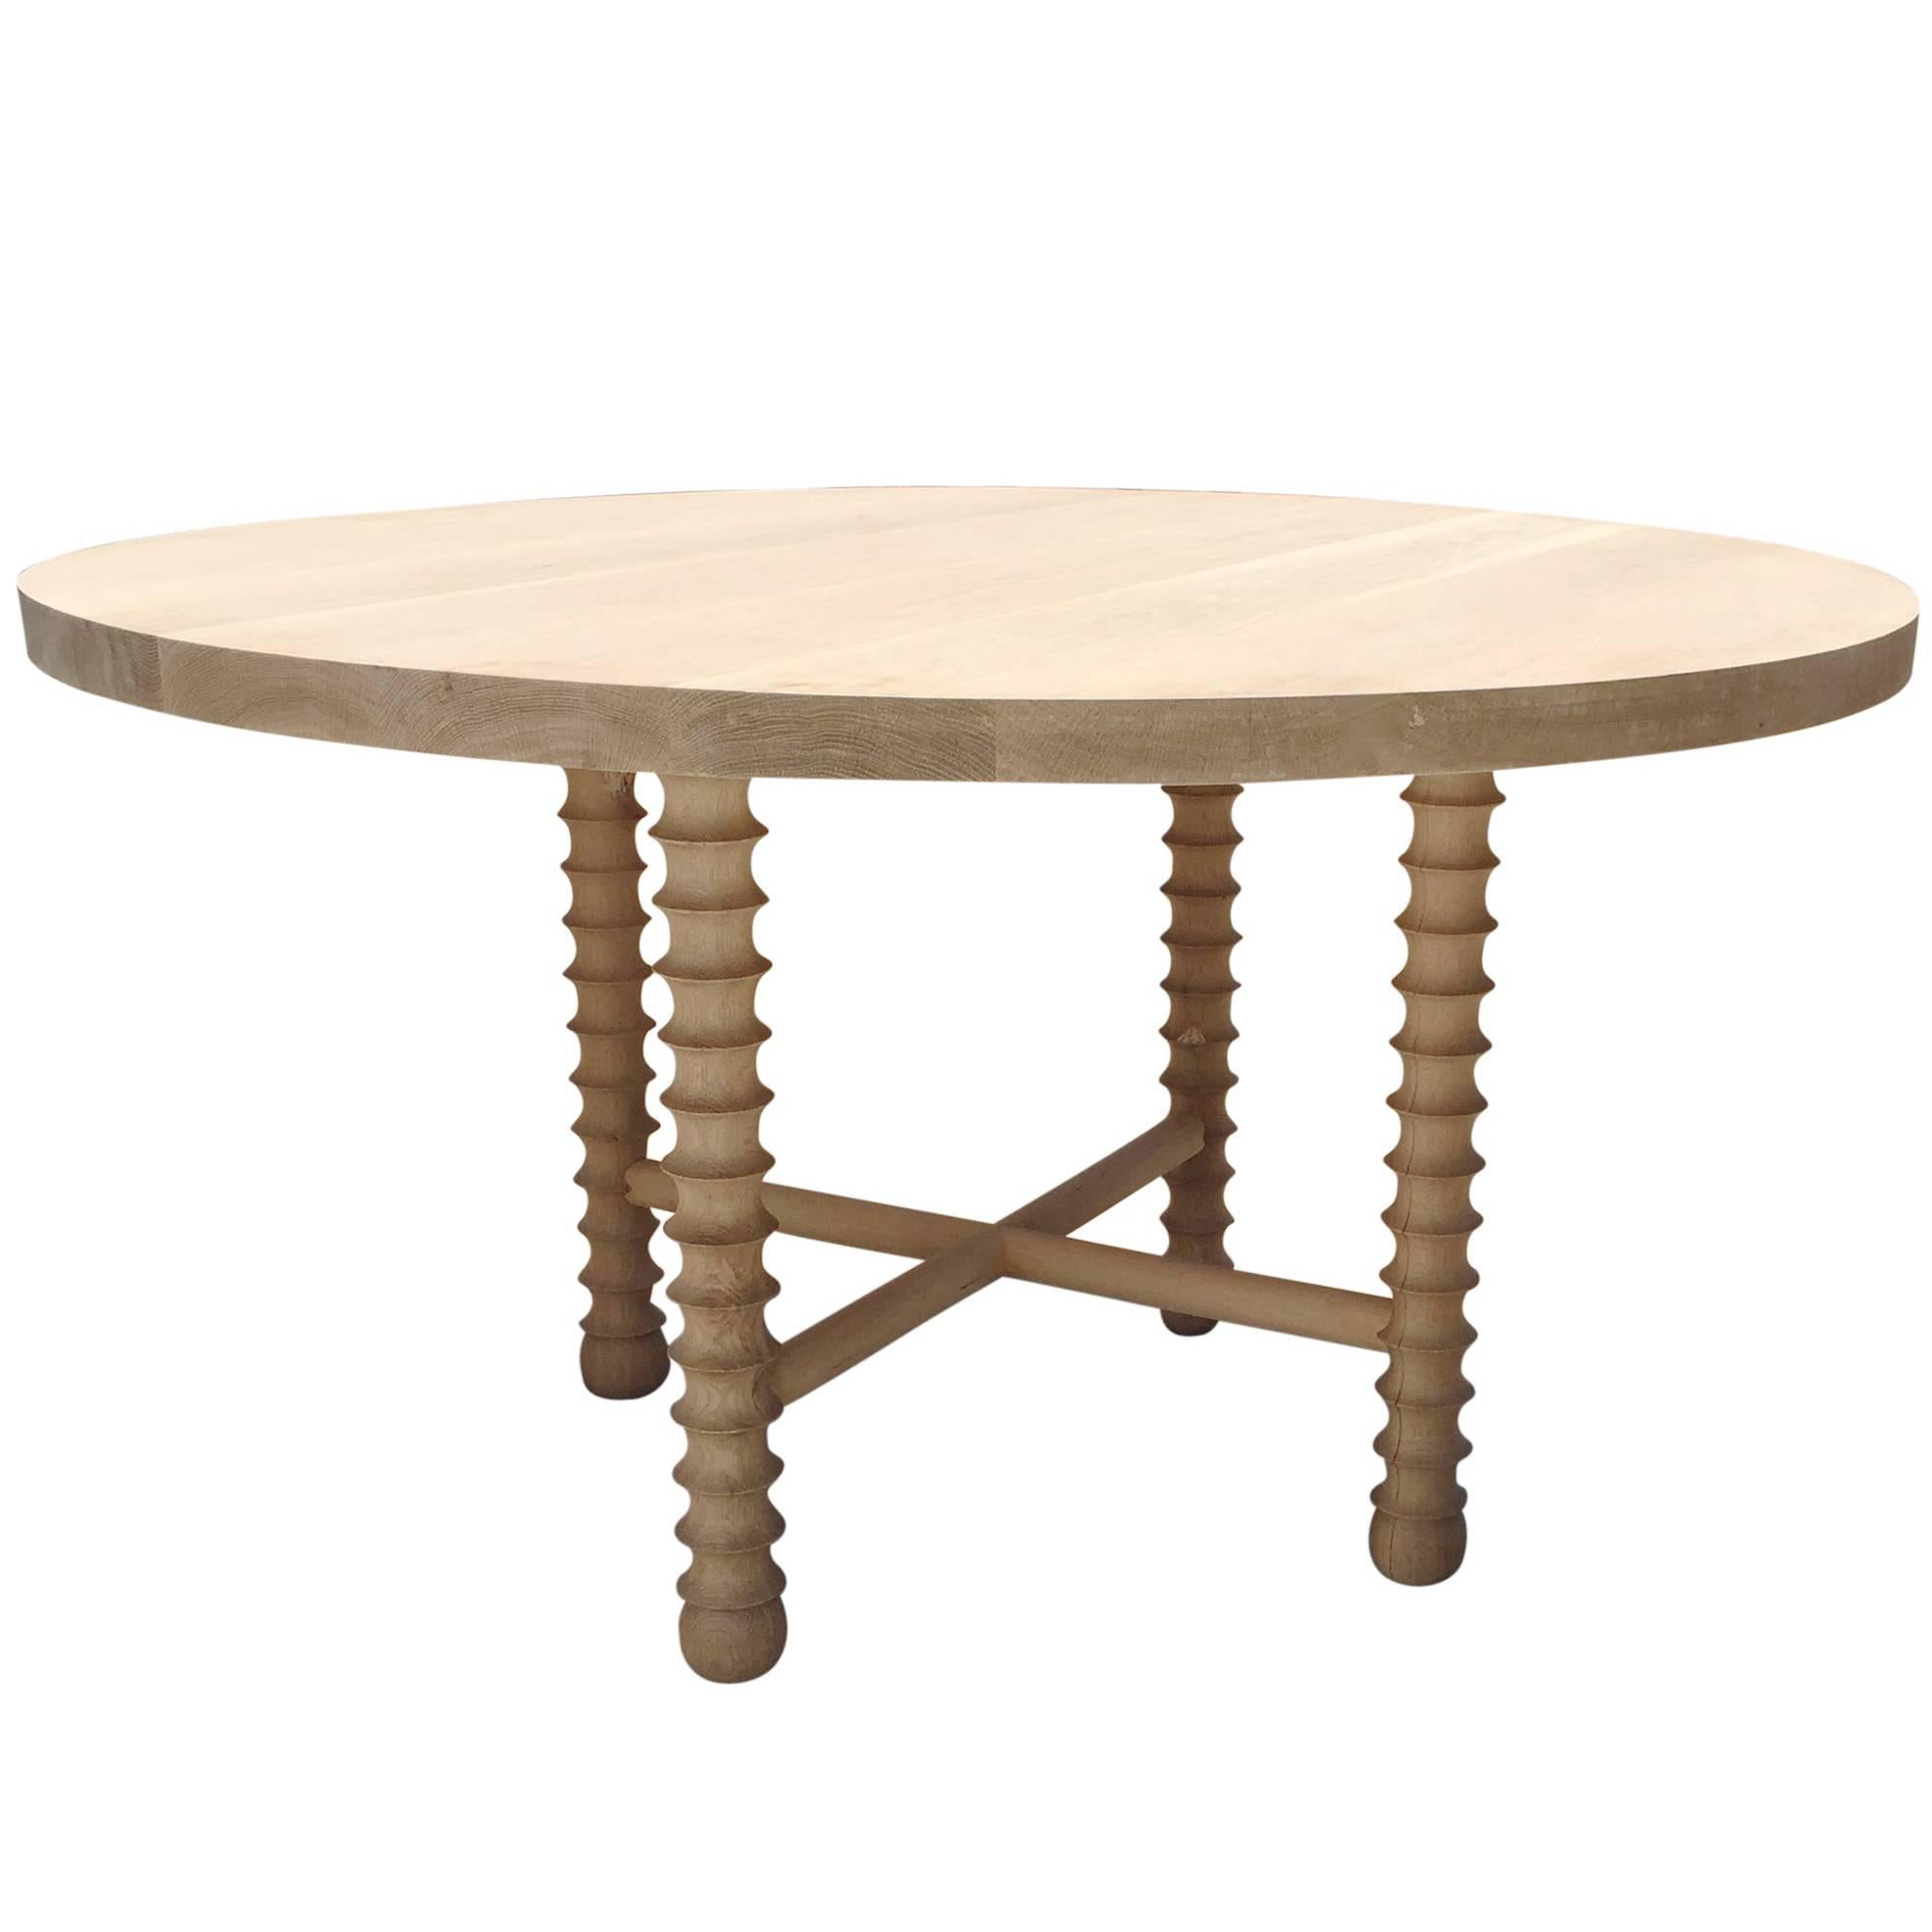 "Ojai" Modern Round Dining or Center Table in White Oak by Haskell Studio For Sale